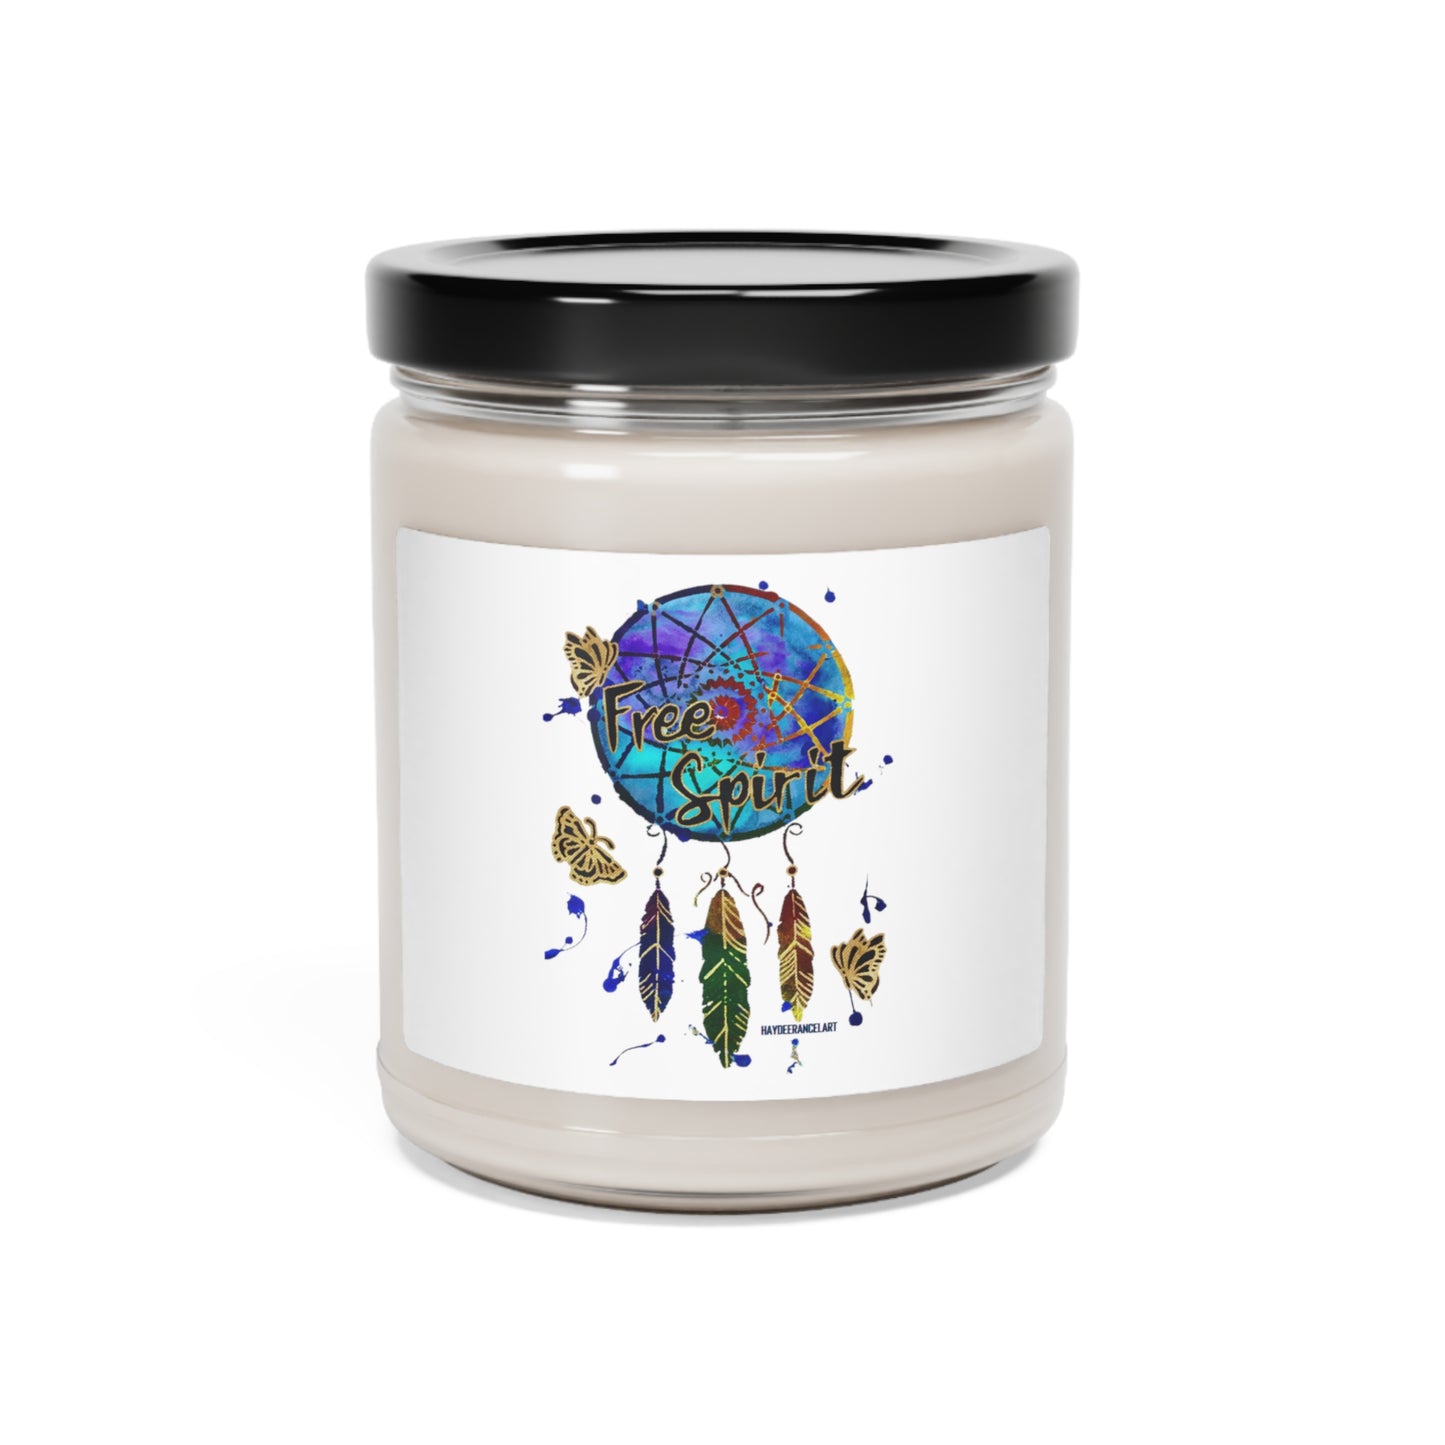 Free Spirit Butterflies Dreamcatcher Feathers Colorful Dream Art Scented Soy Candle, 9oz